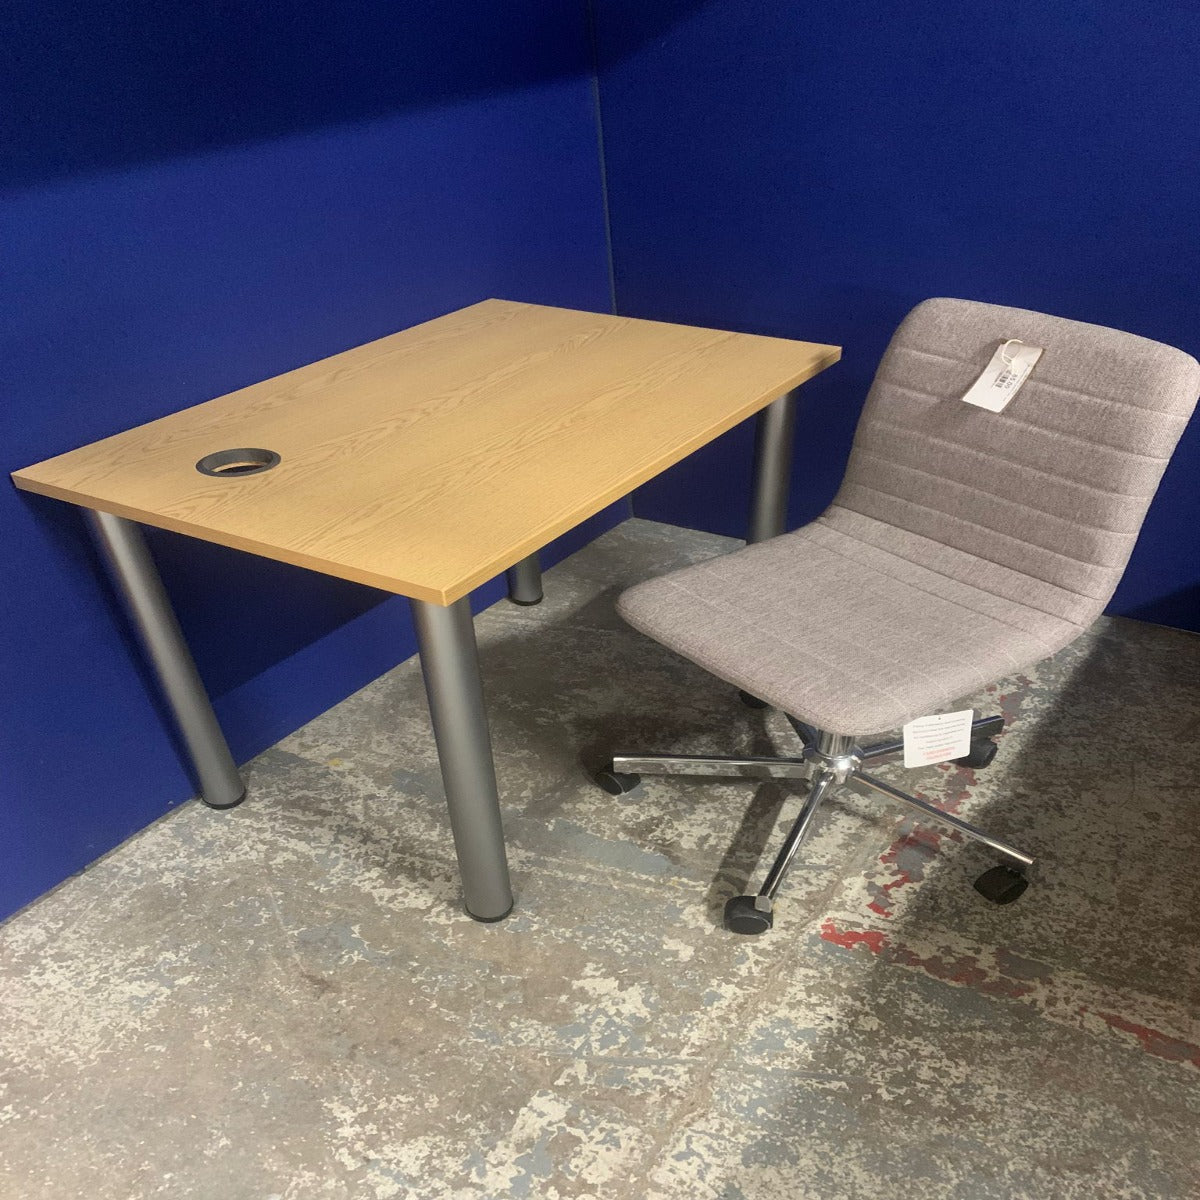 BUNDLE DEAL: Tempo fabric swivel chair and study desk